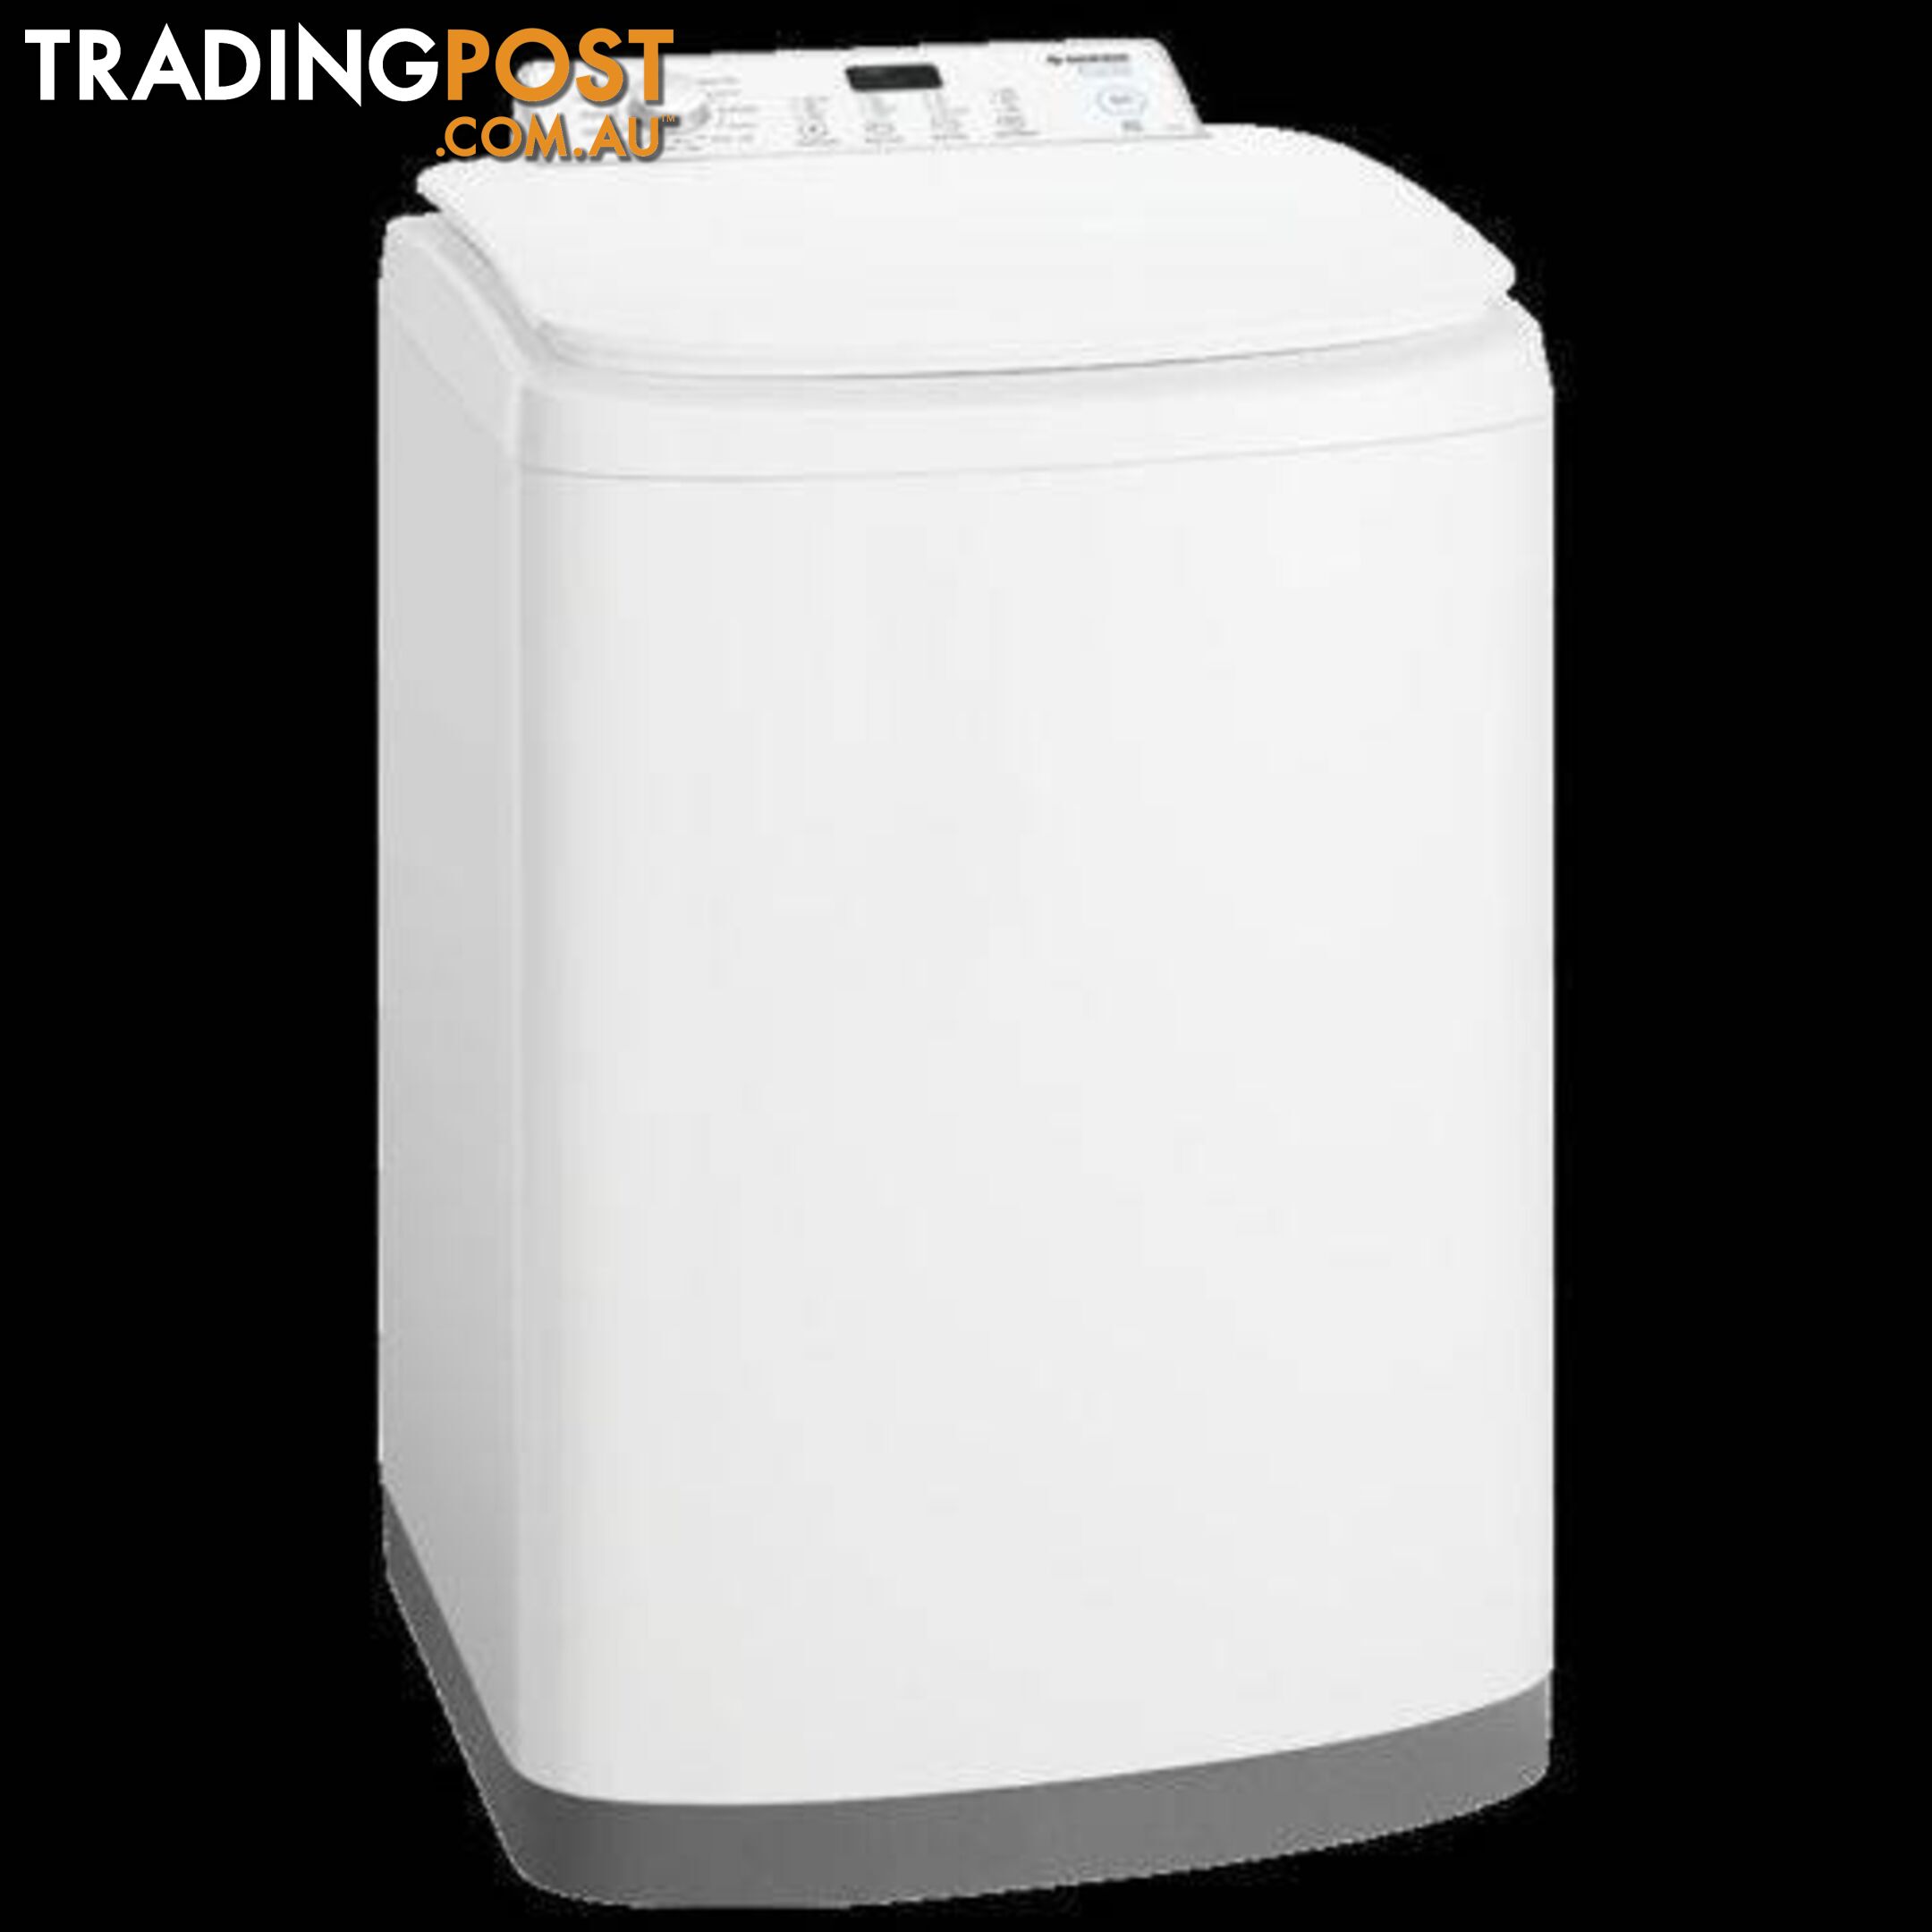 Simpson 5.5kg Top Load Washer - Model: SWT5541